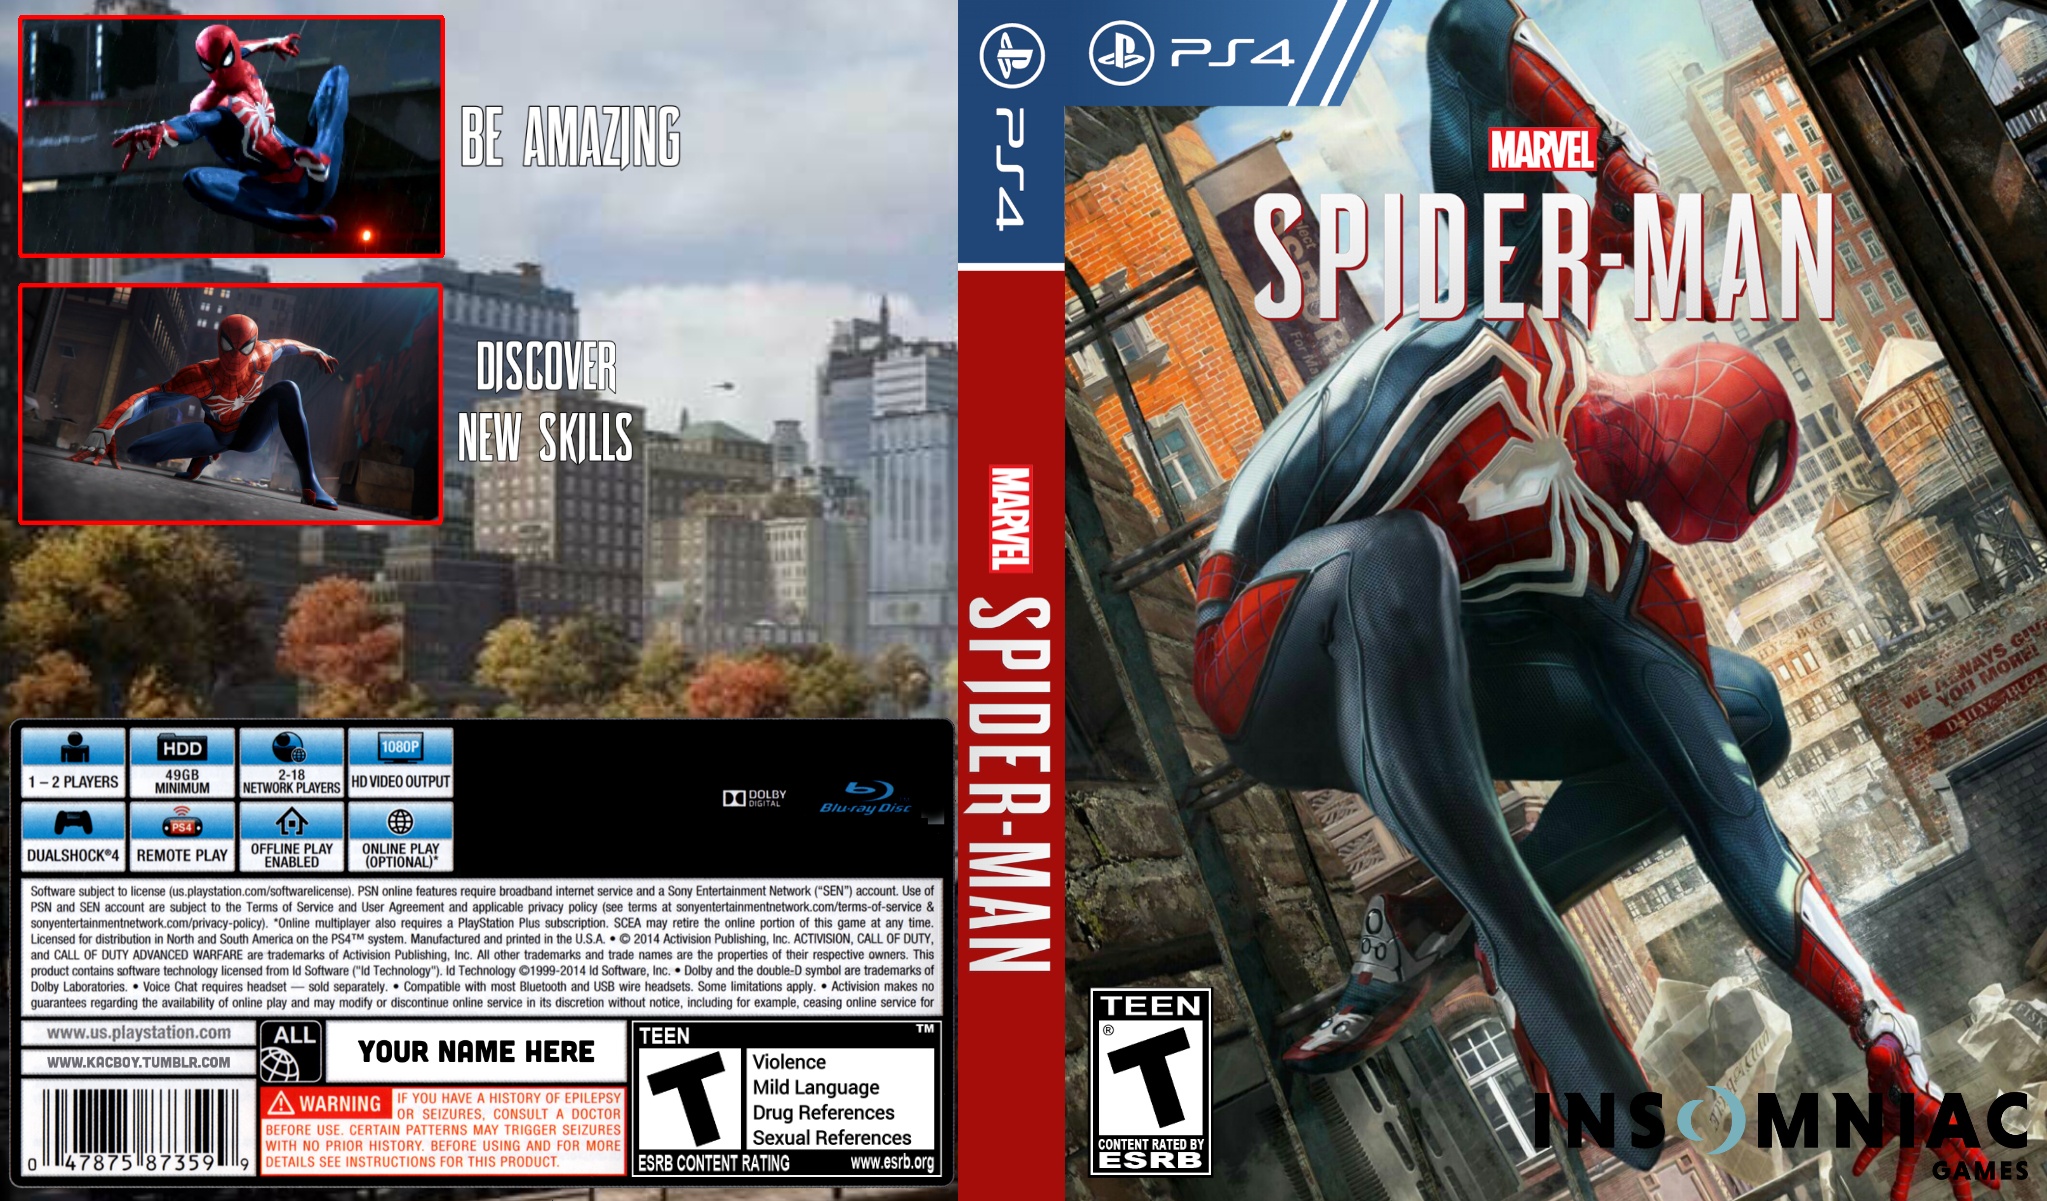 Spider-Man PS4 box cover